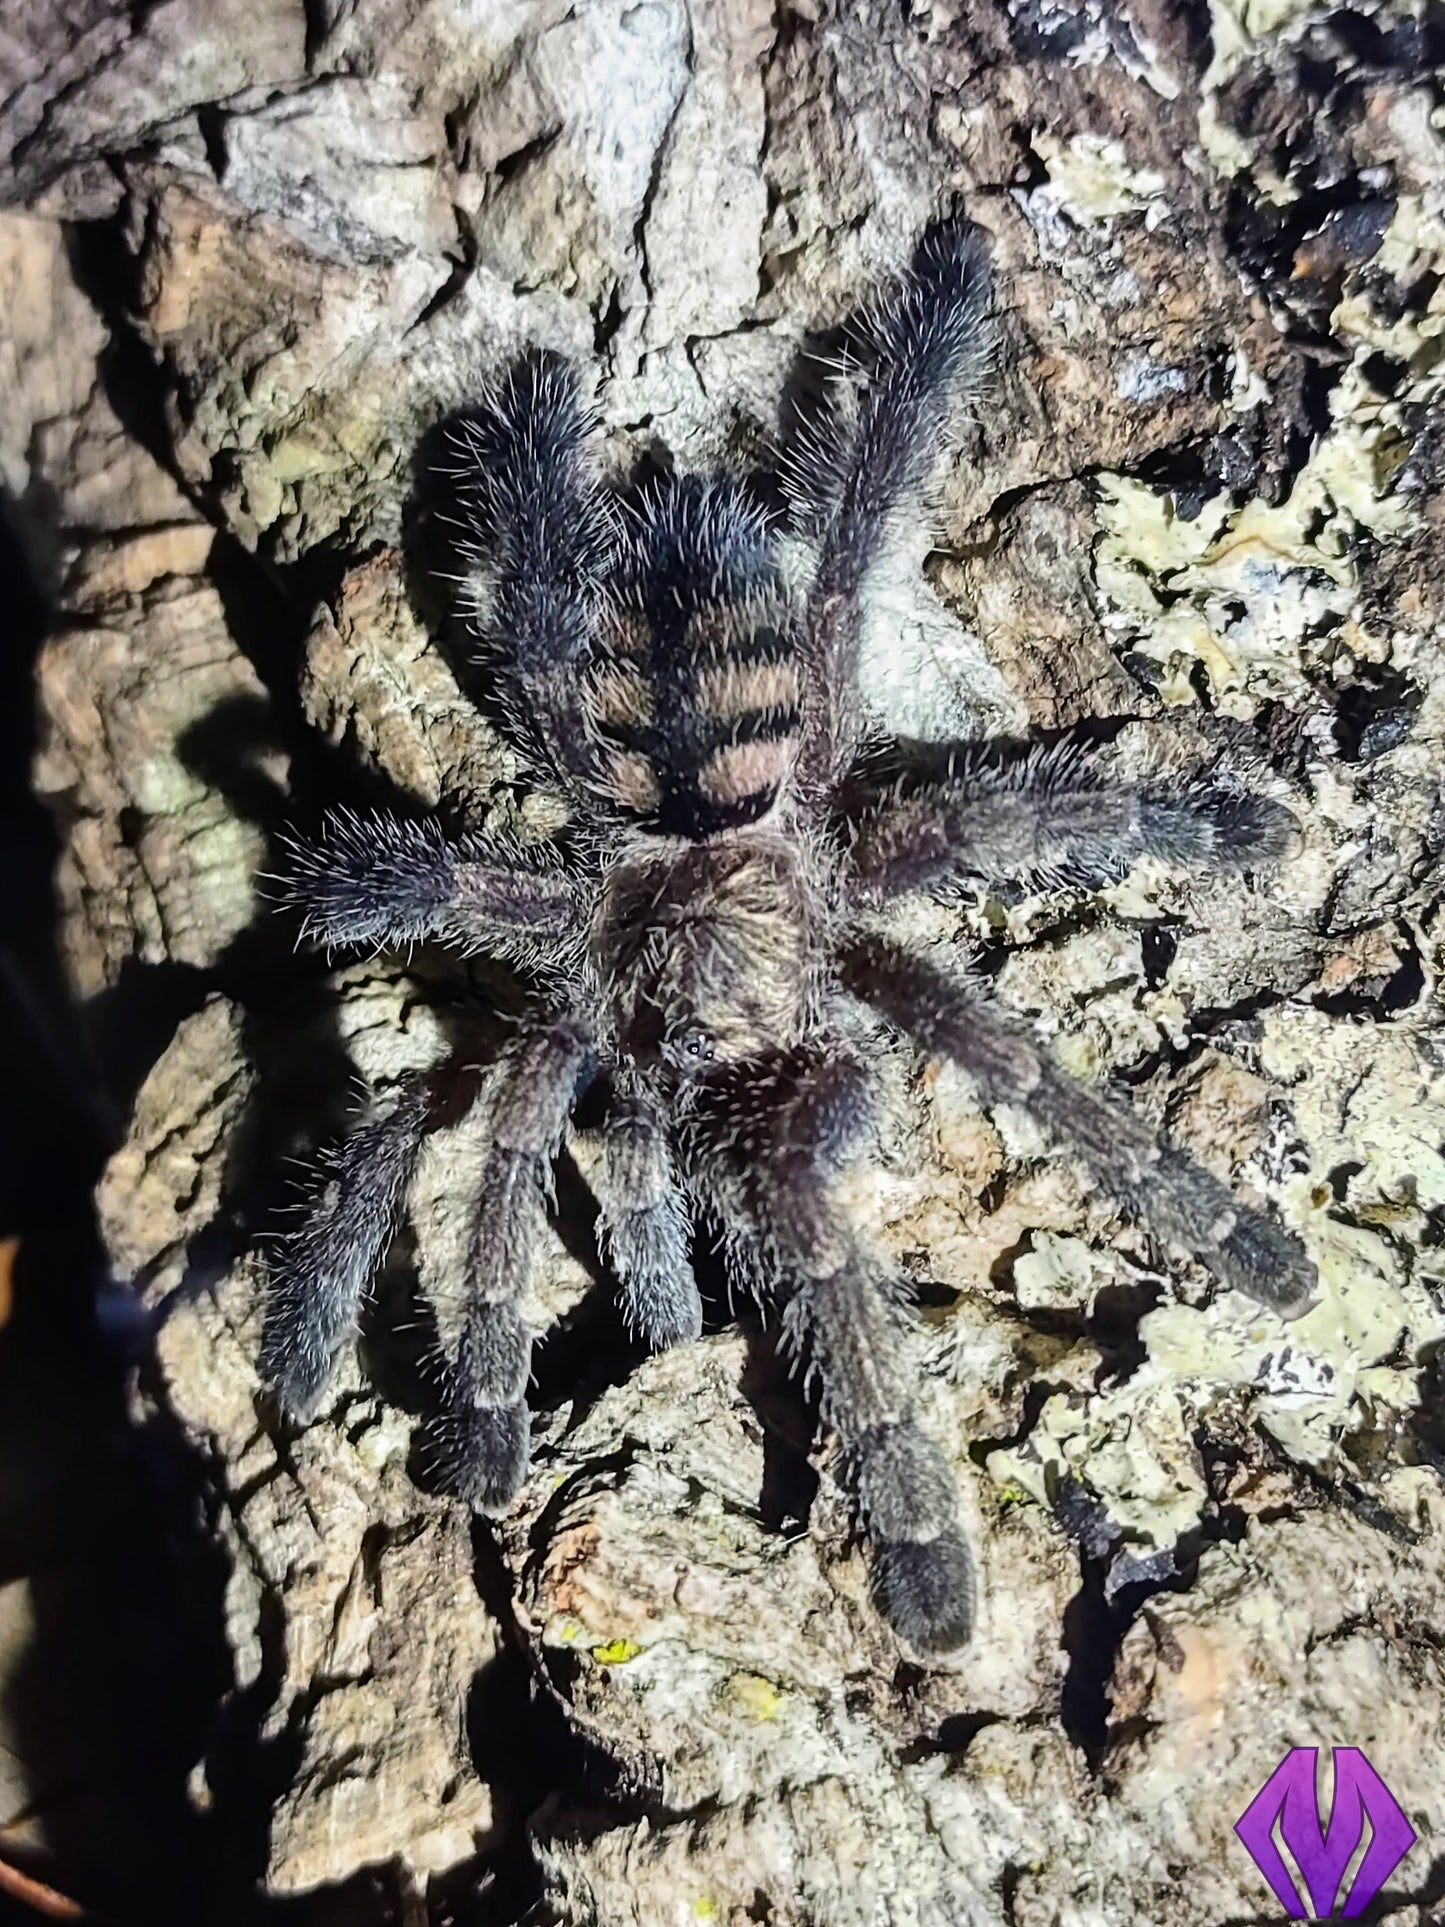 Avicularia sp. "Colombia" ¾"